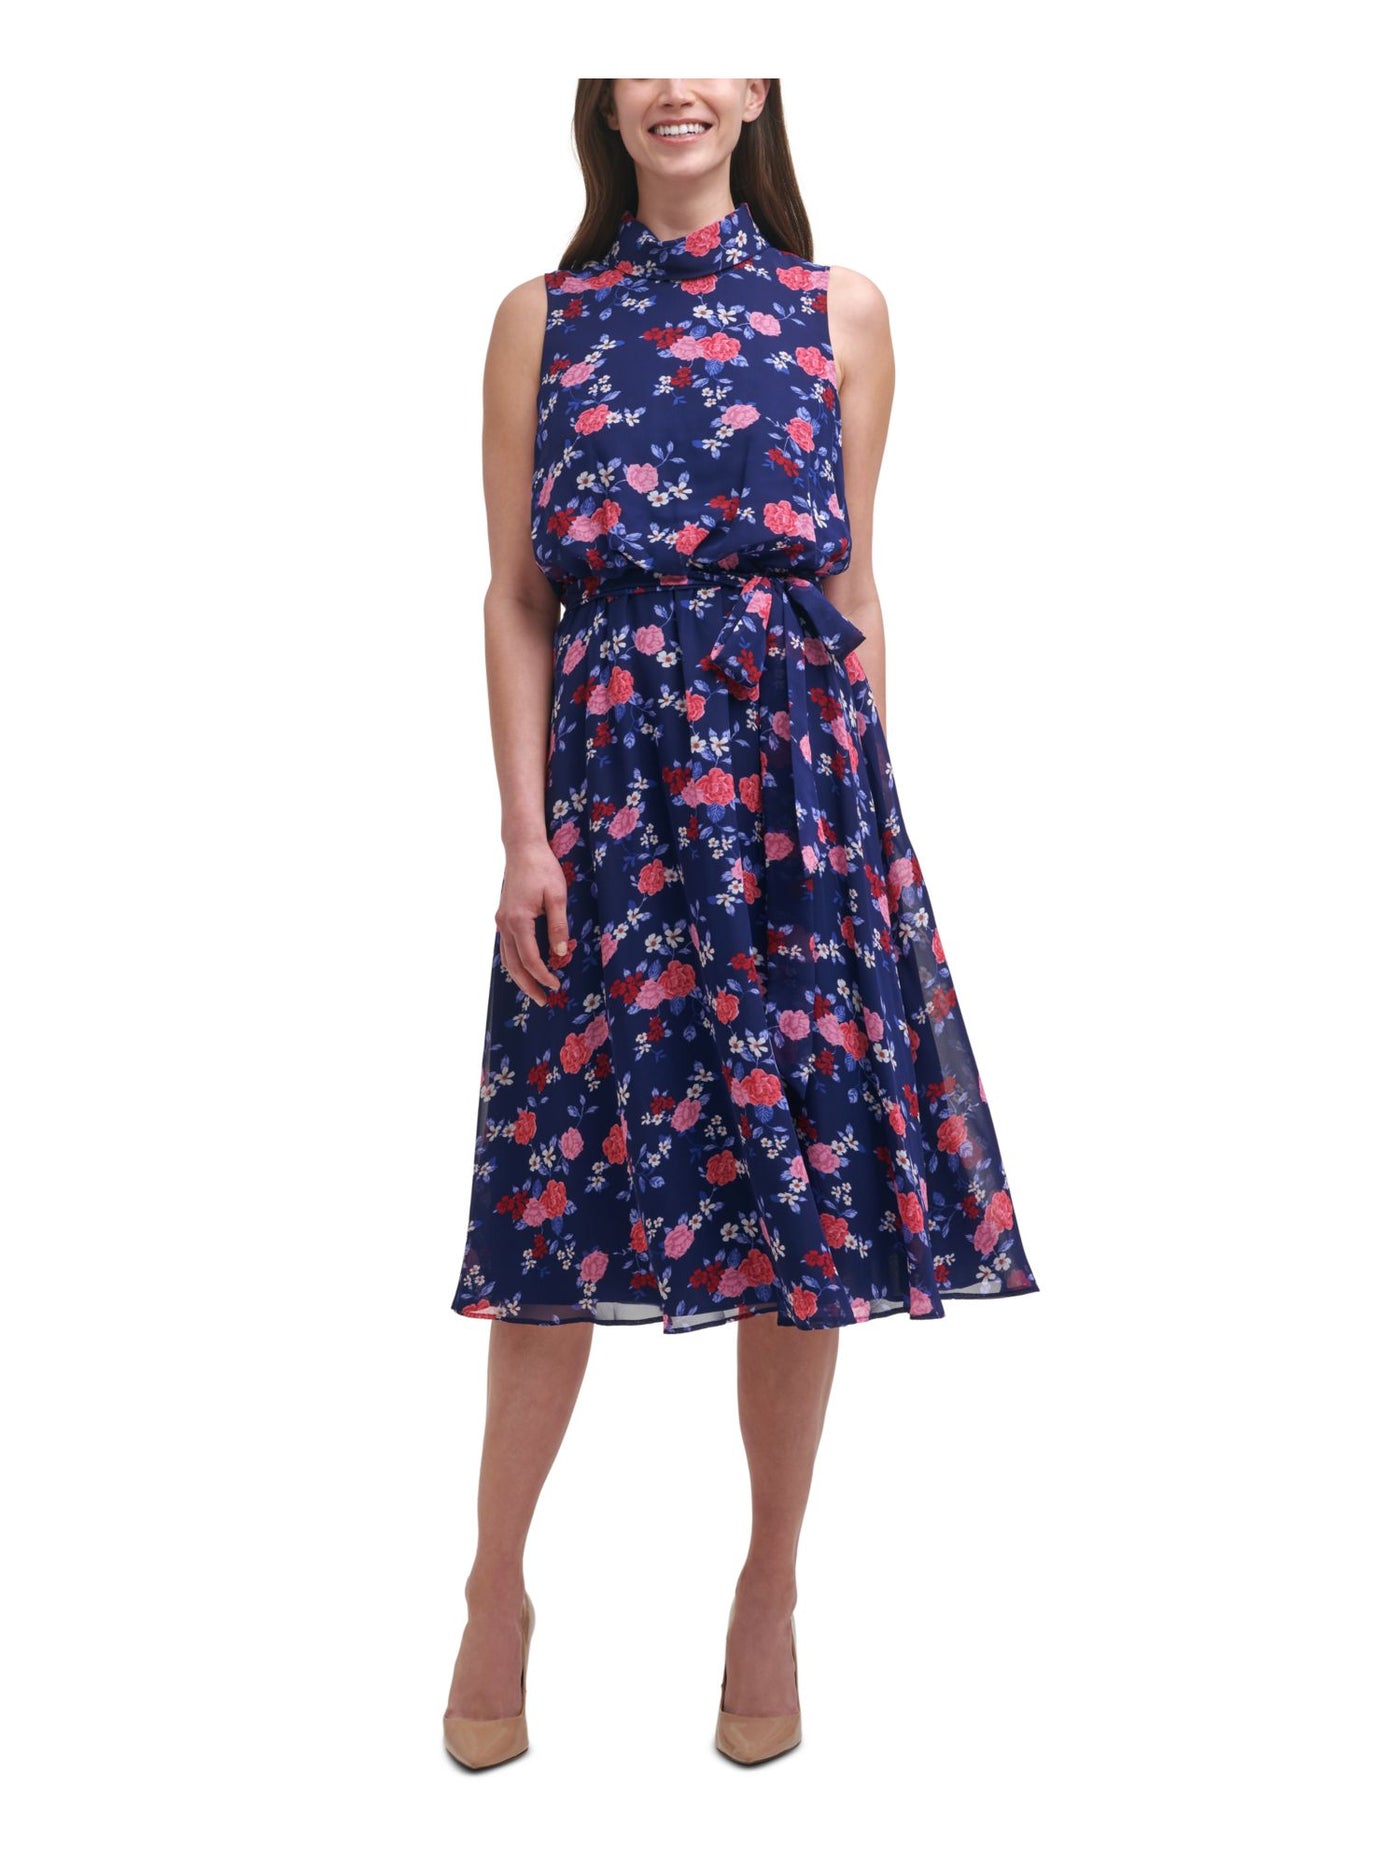 HARPER ROSE Womens Navy Zippered Belted Mock Roll-neck Chiffon Floral Sleeveless Midi Wear To Work Fit + Flare Dress 4